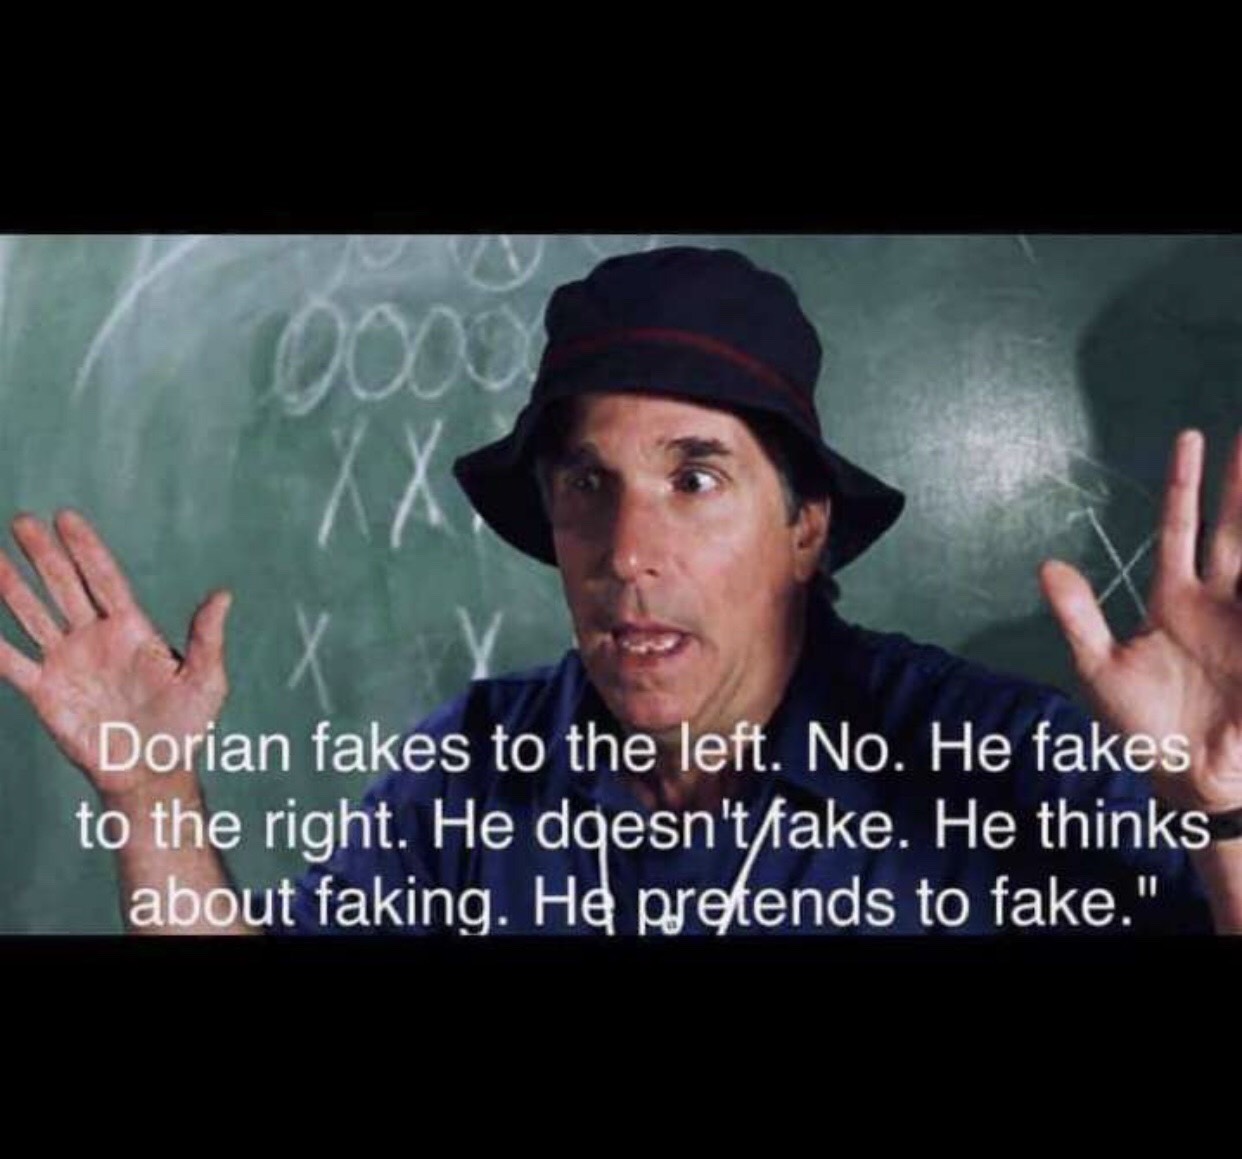 coach klein waterboy - Dorian fakes to the left. No. He fakes to the right. He doesn't fake. He thinks about faking. He pretends to fake."